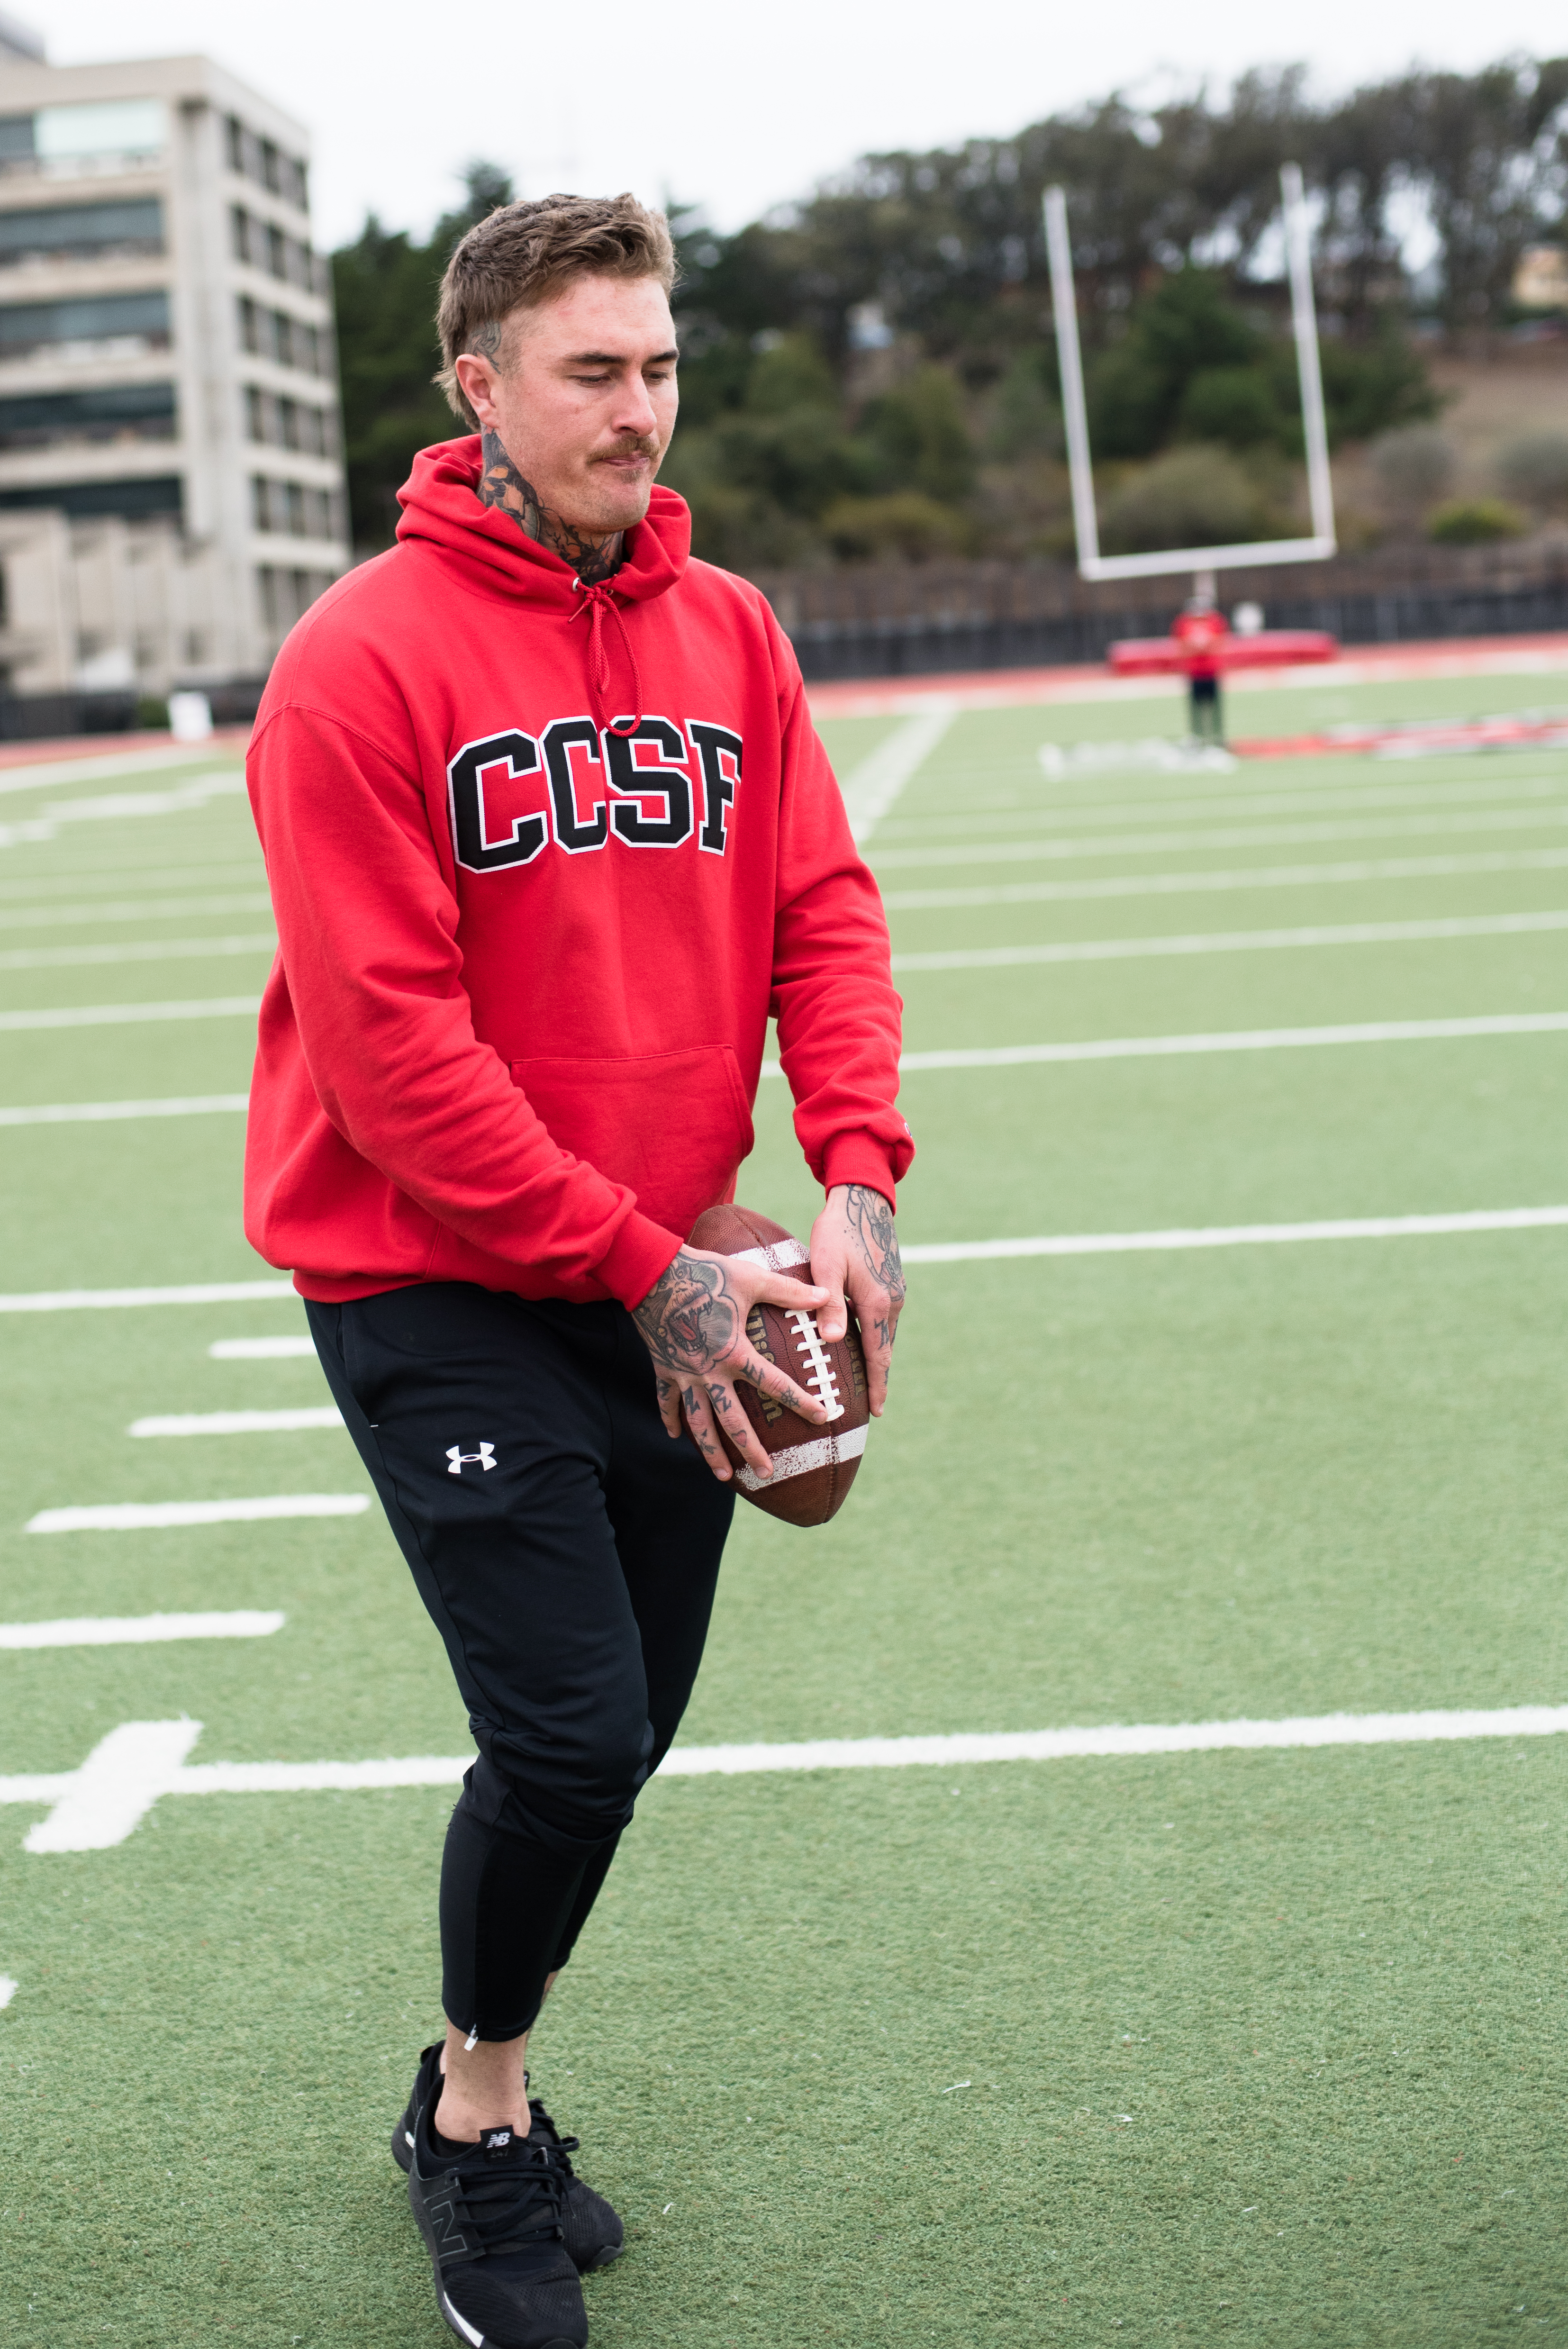 City College Rams #93, punter Louis Headley practices his celebrated kick on the football field at City College’s Ocean Campus on Nov. 20, 2017. Photo by Otto Pippenger.